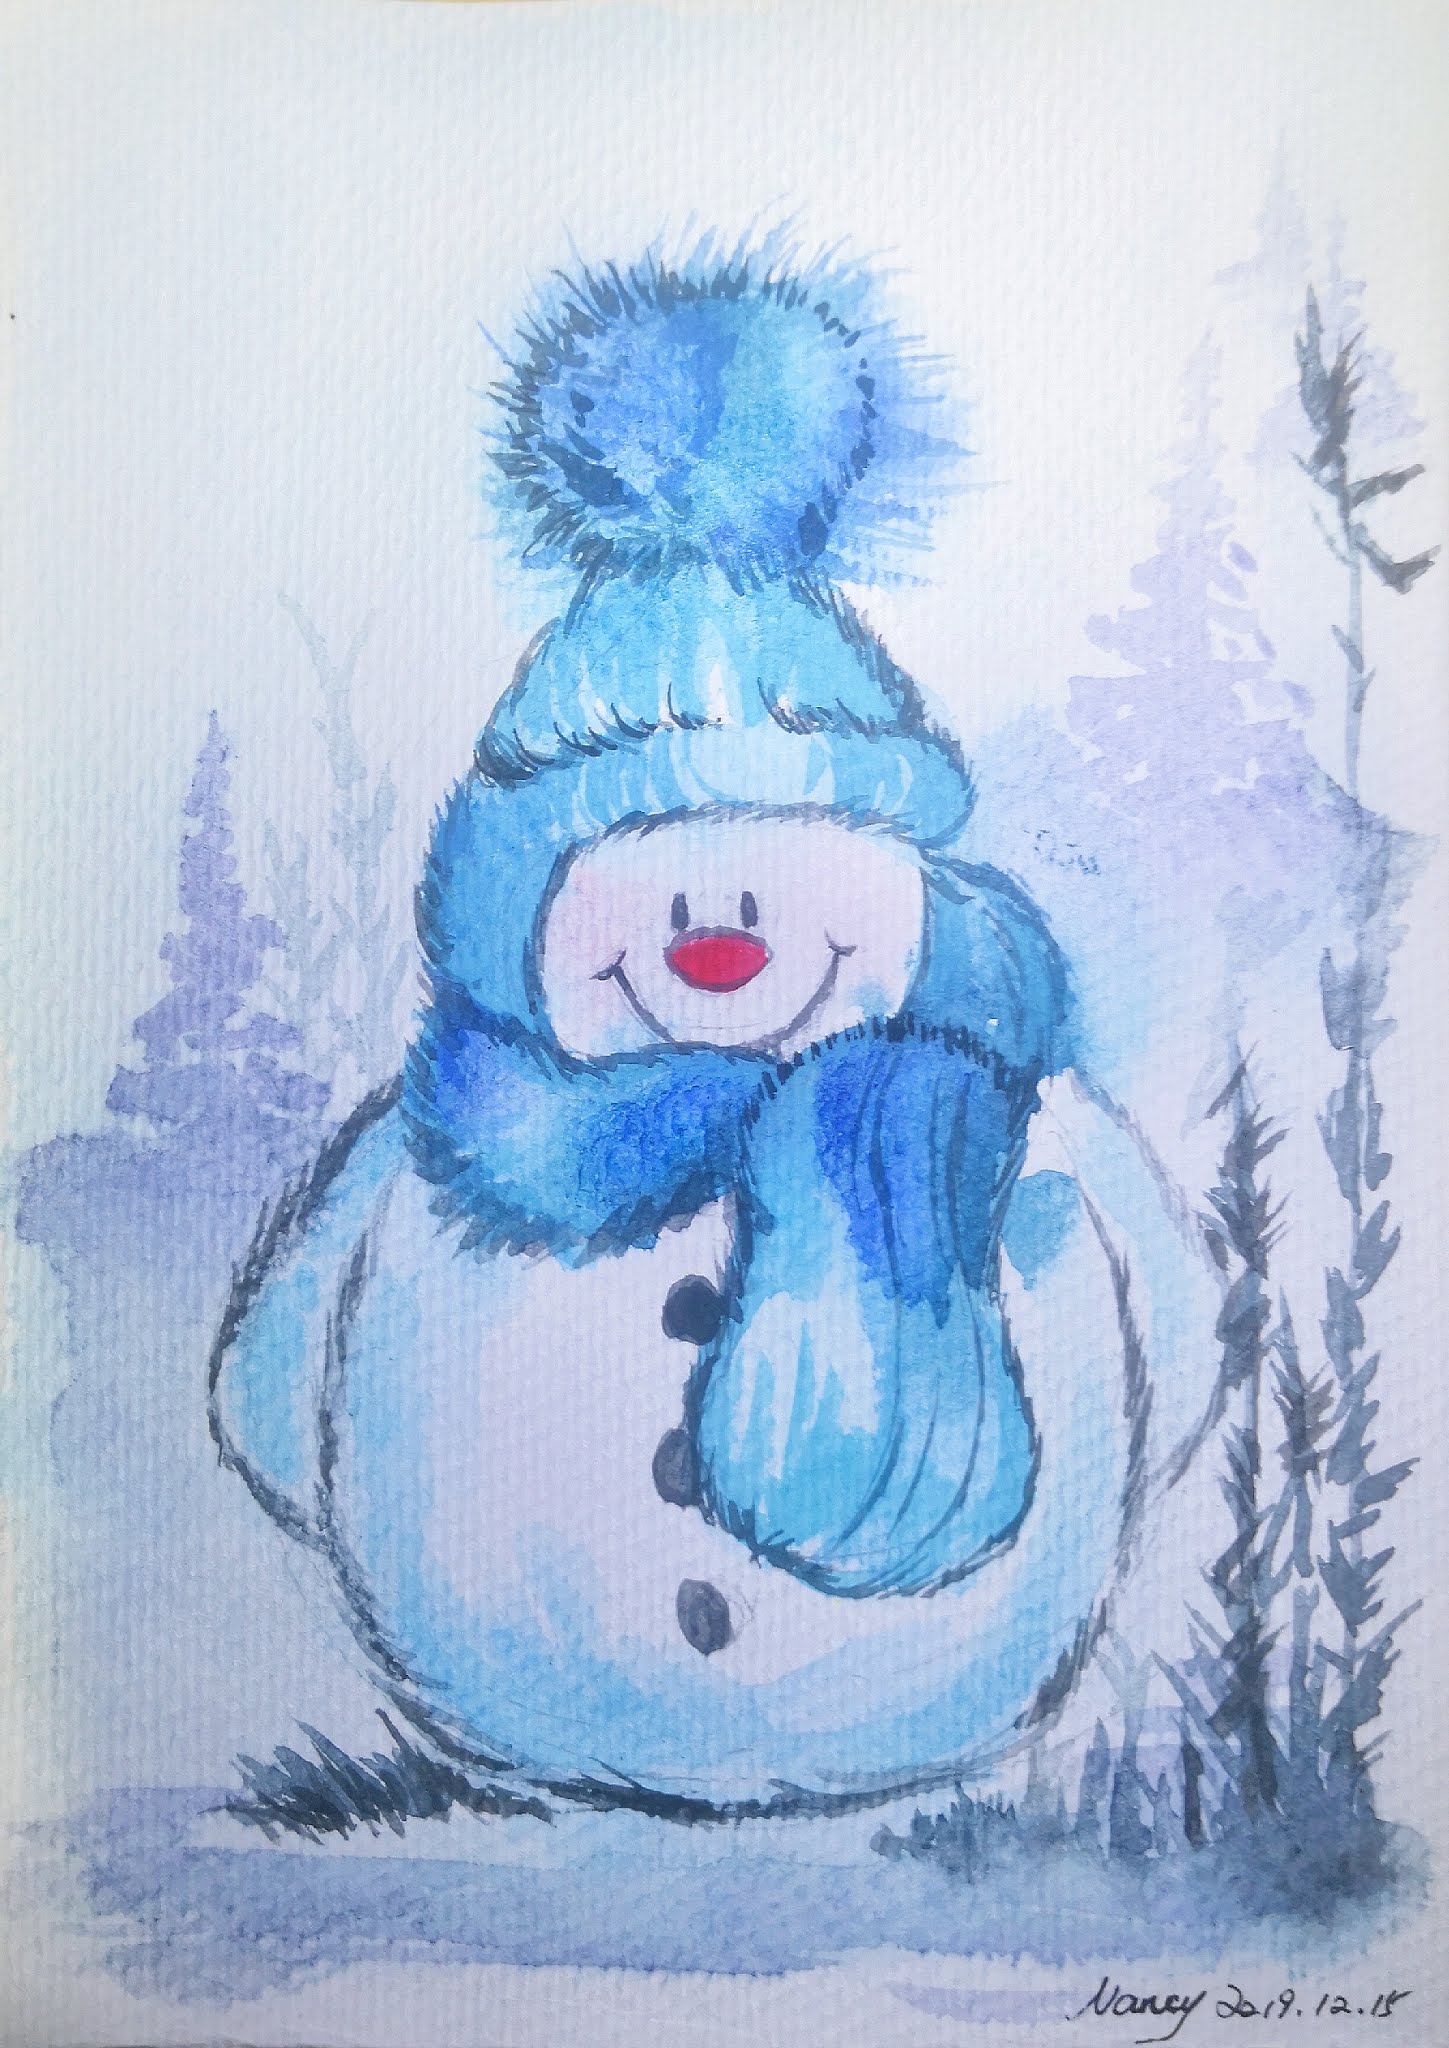 How to draw snowman in watercolor